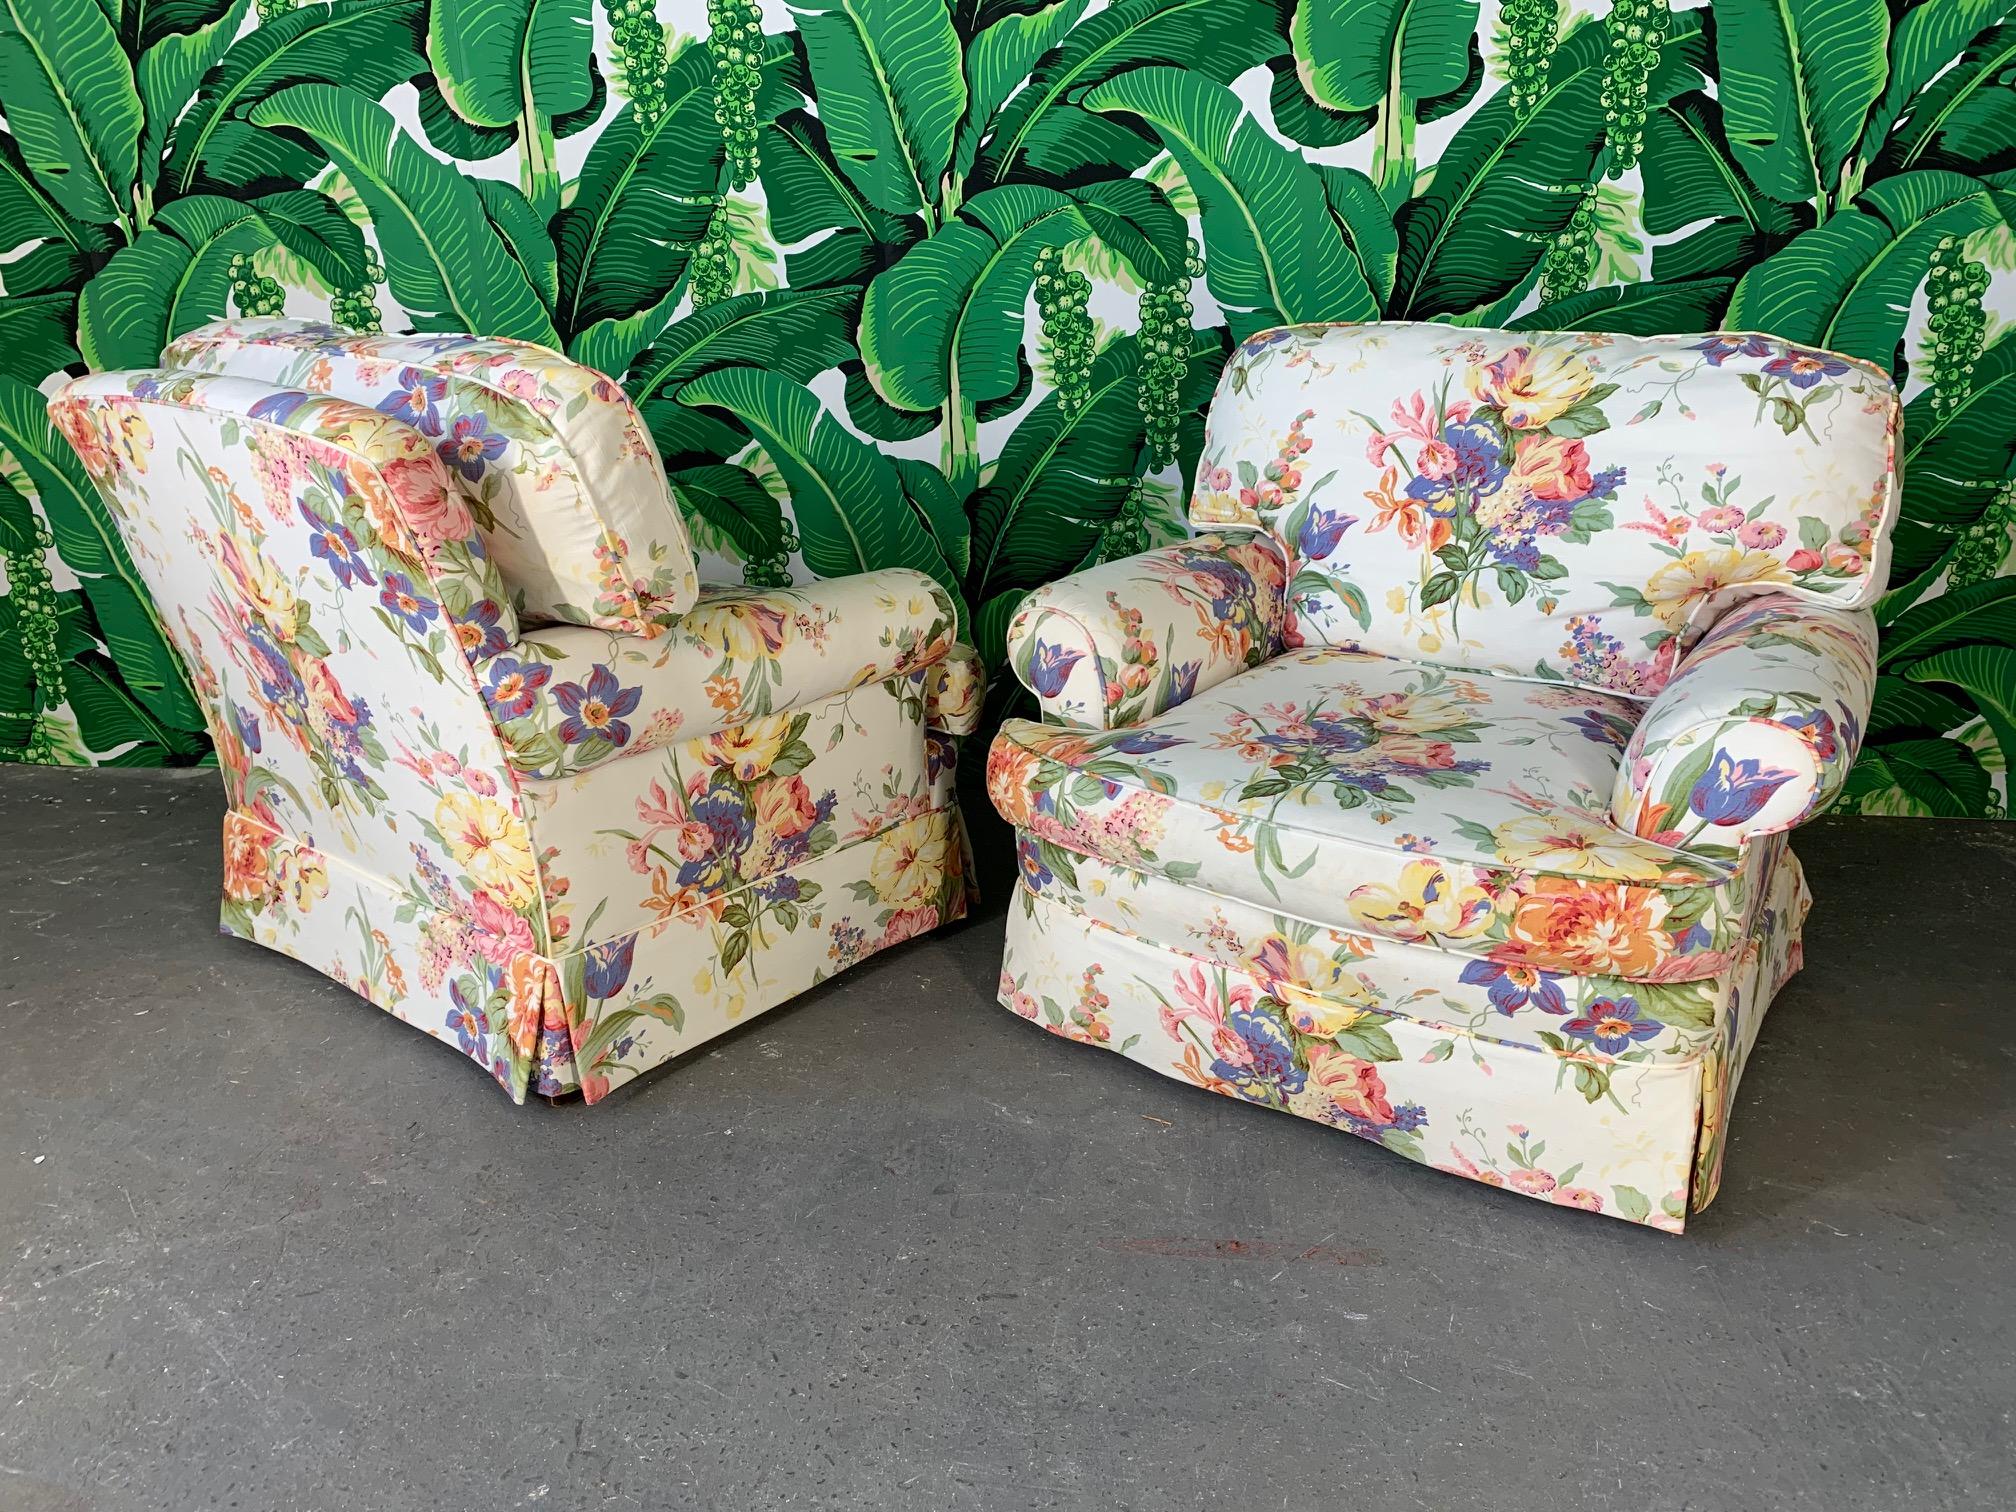 Cheery pair of floral upholstered club chairs by Henredon for Ralph Lauren. Down filled cushions make these chairs ultra comfortable. Very good condition, with no rips or stains.